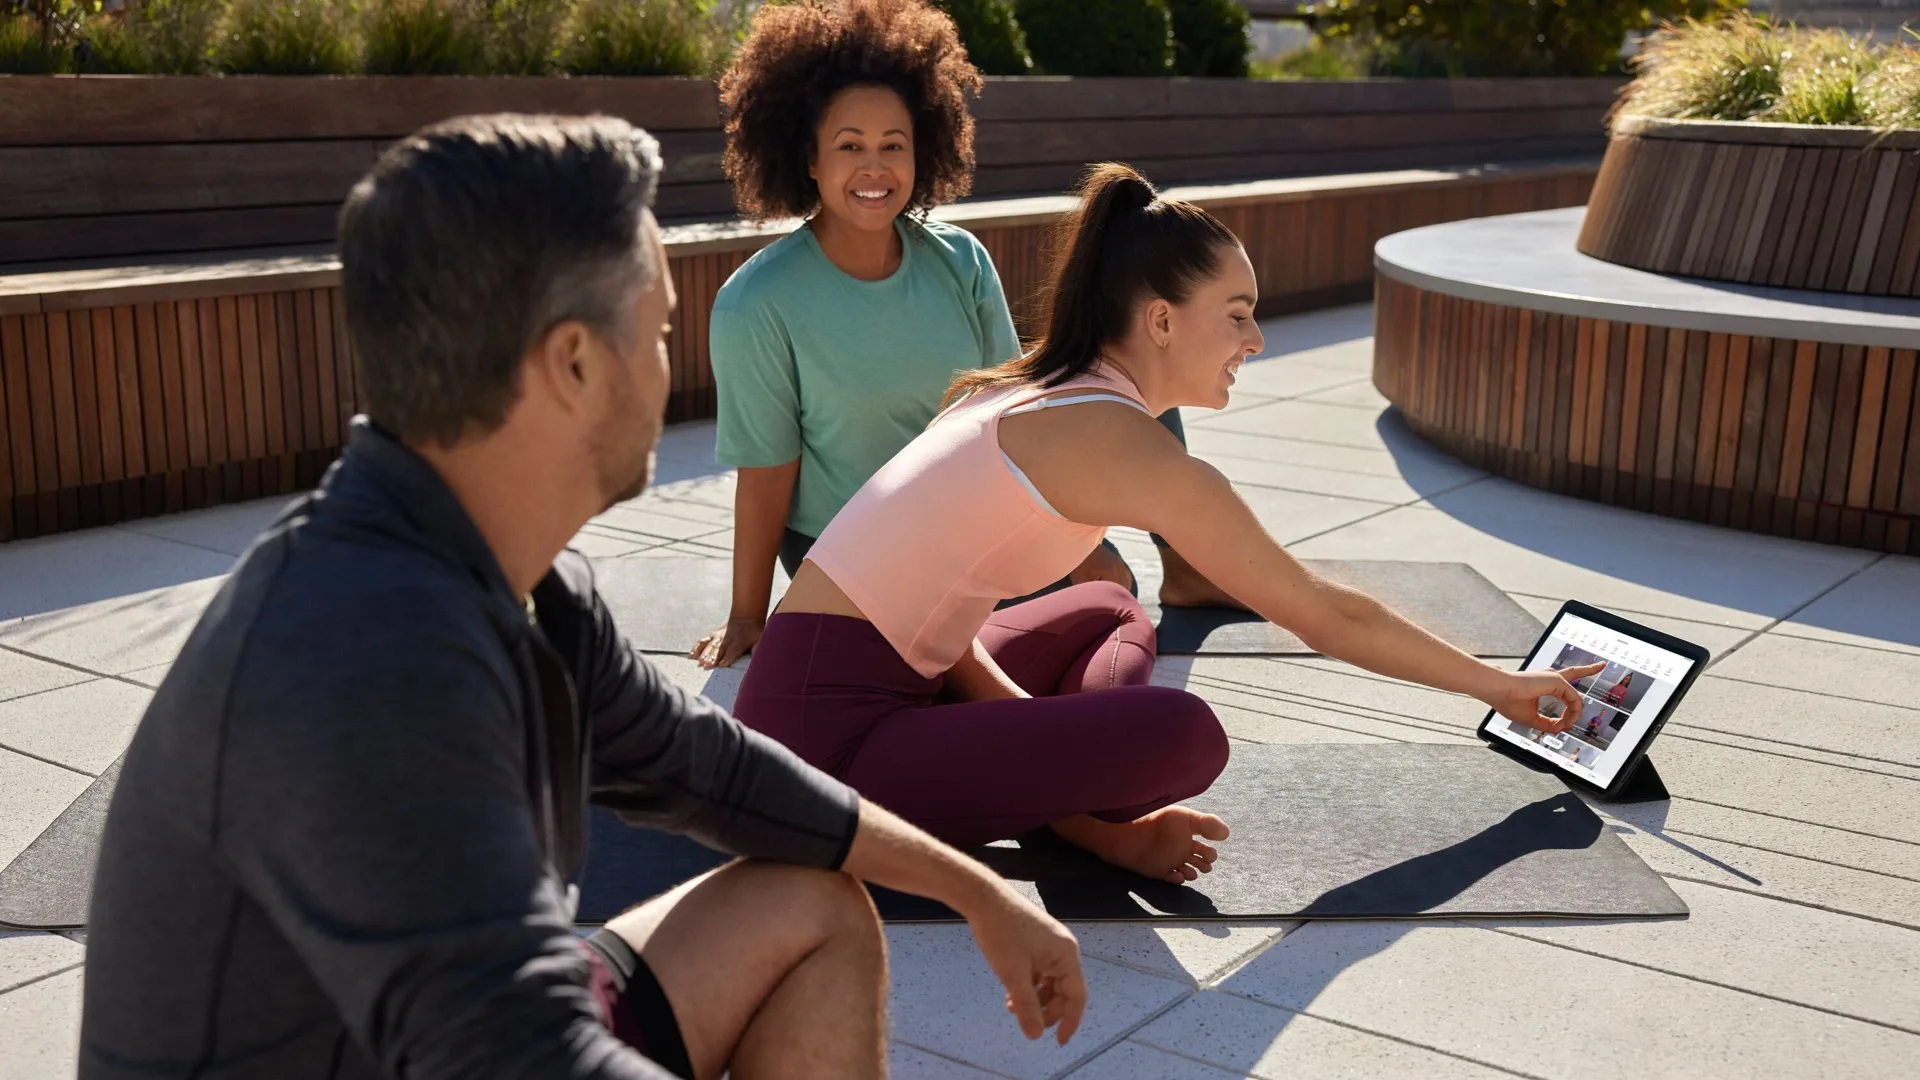 Peloton members using the app to work out outdoors